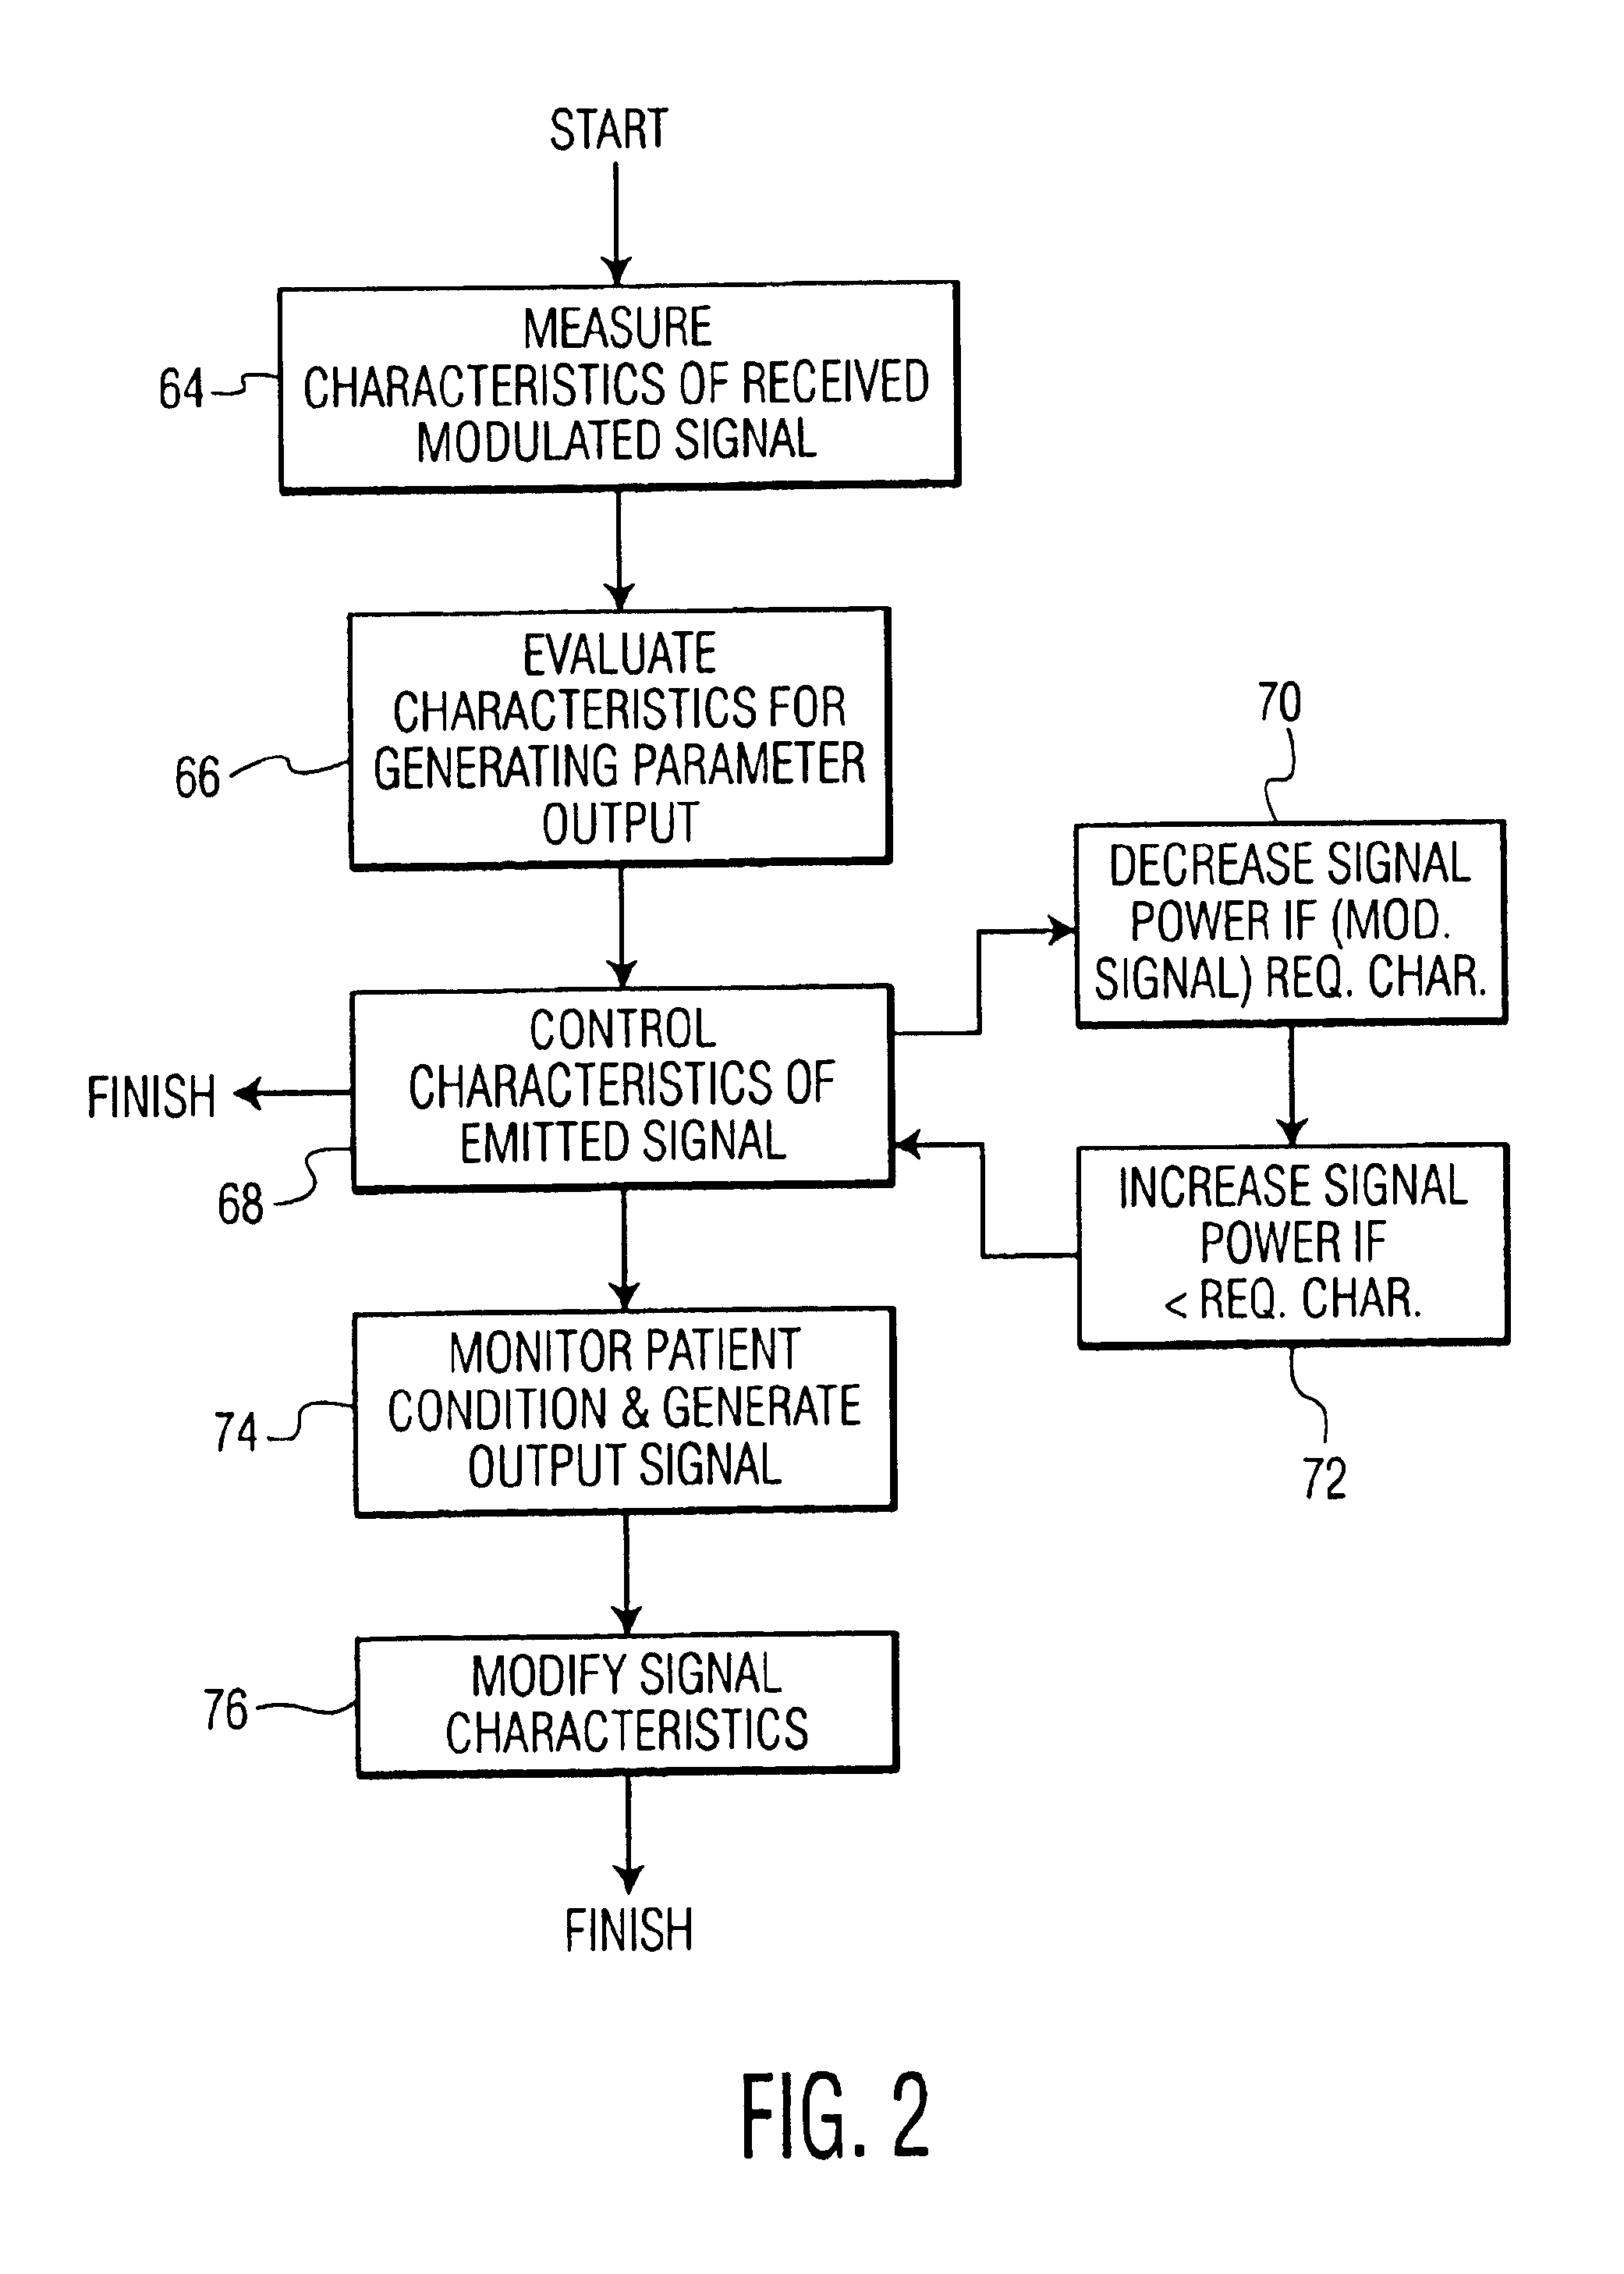 Power conserving adaptive control system for generating signal in portable medical devices